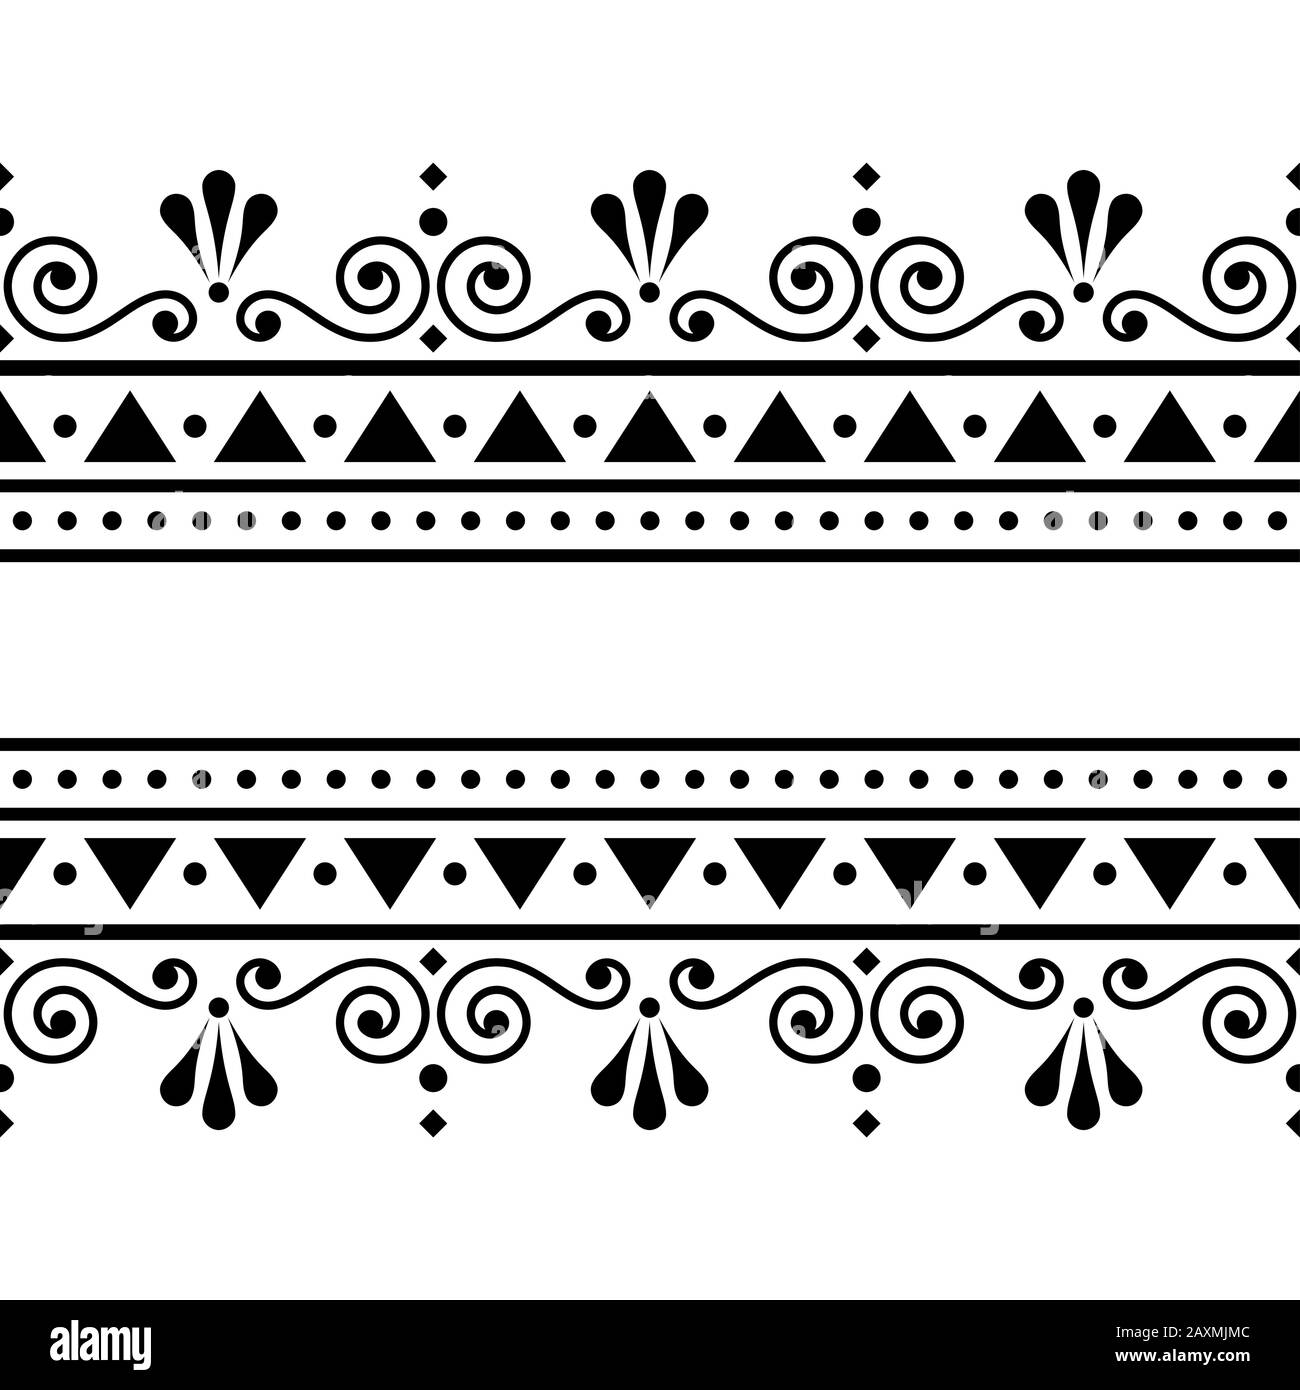 Valentine's Day vector greeting card design or wedding inviatation - Scandinavian traditional embroidery folk art style with flowers Stock Vector